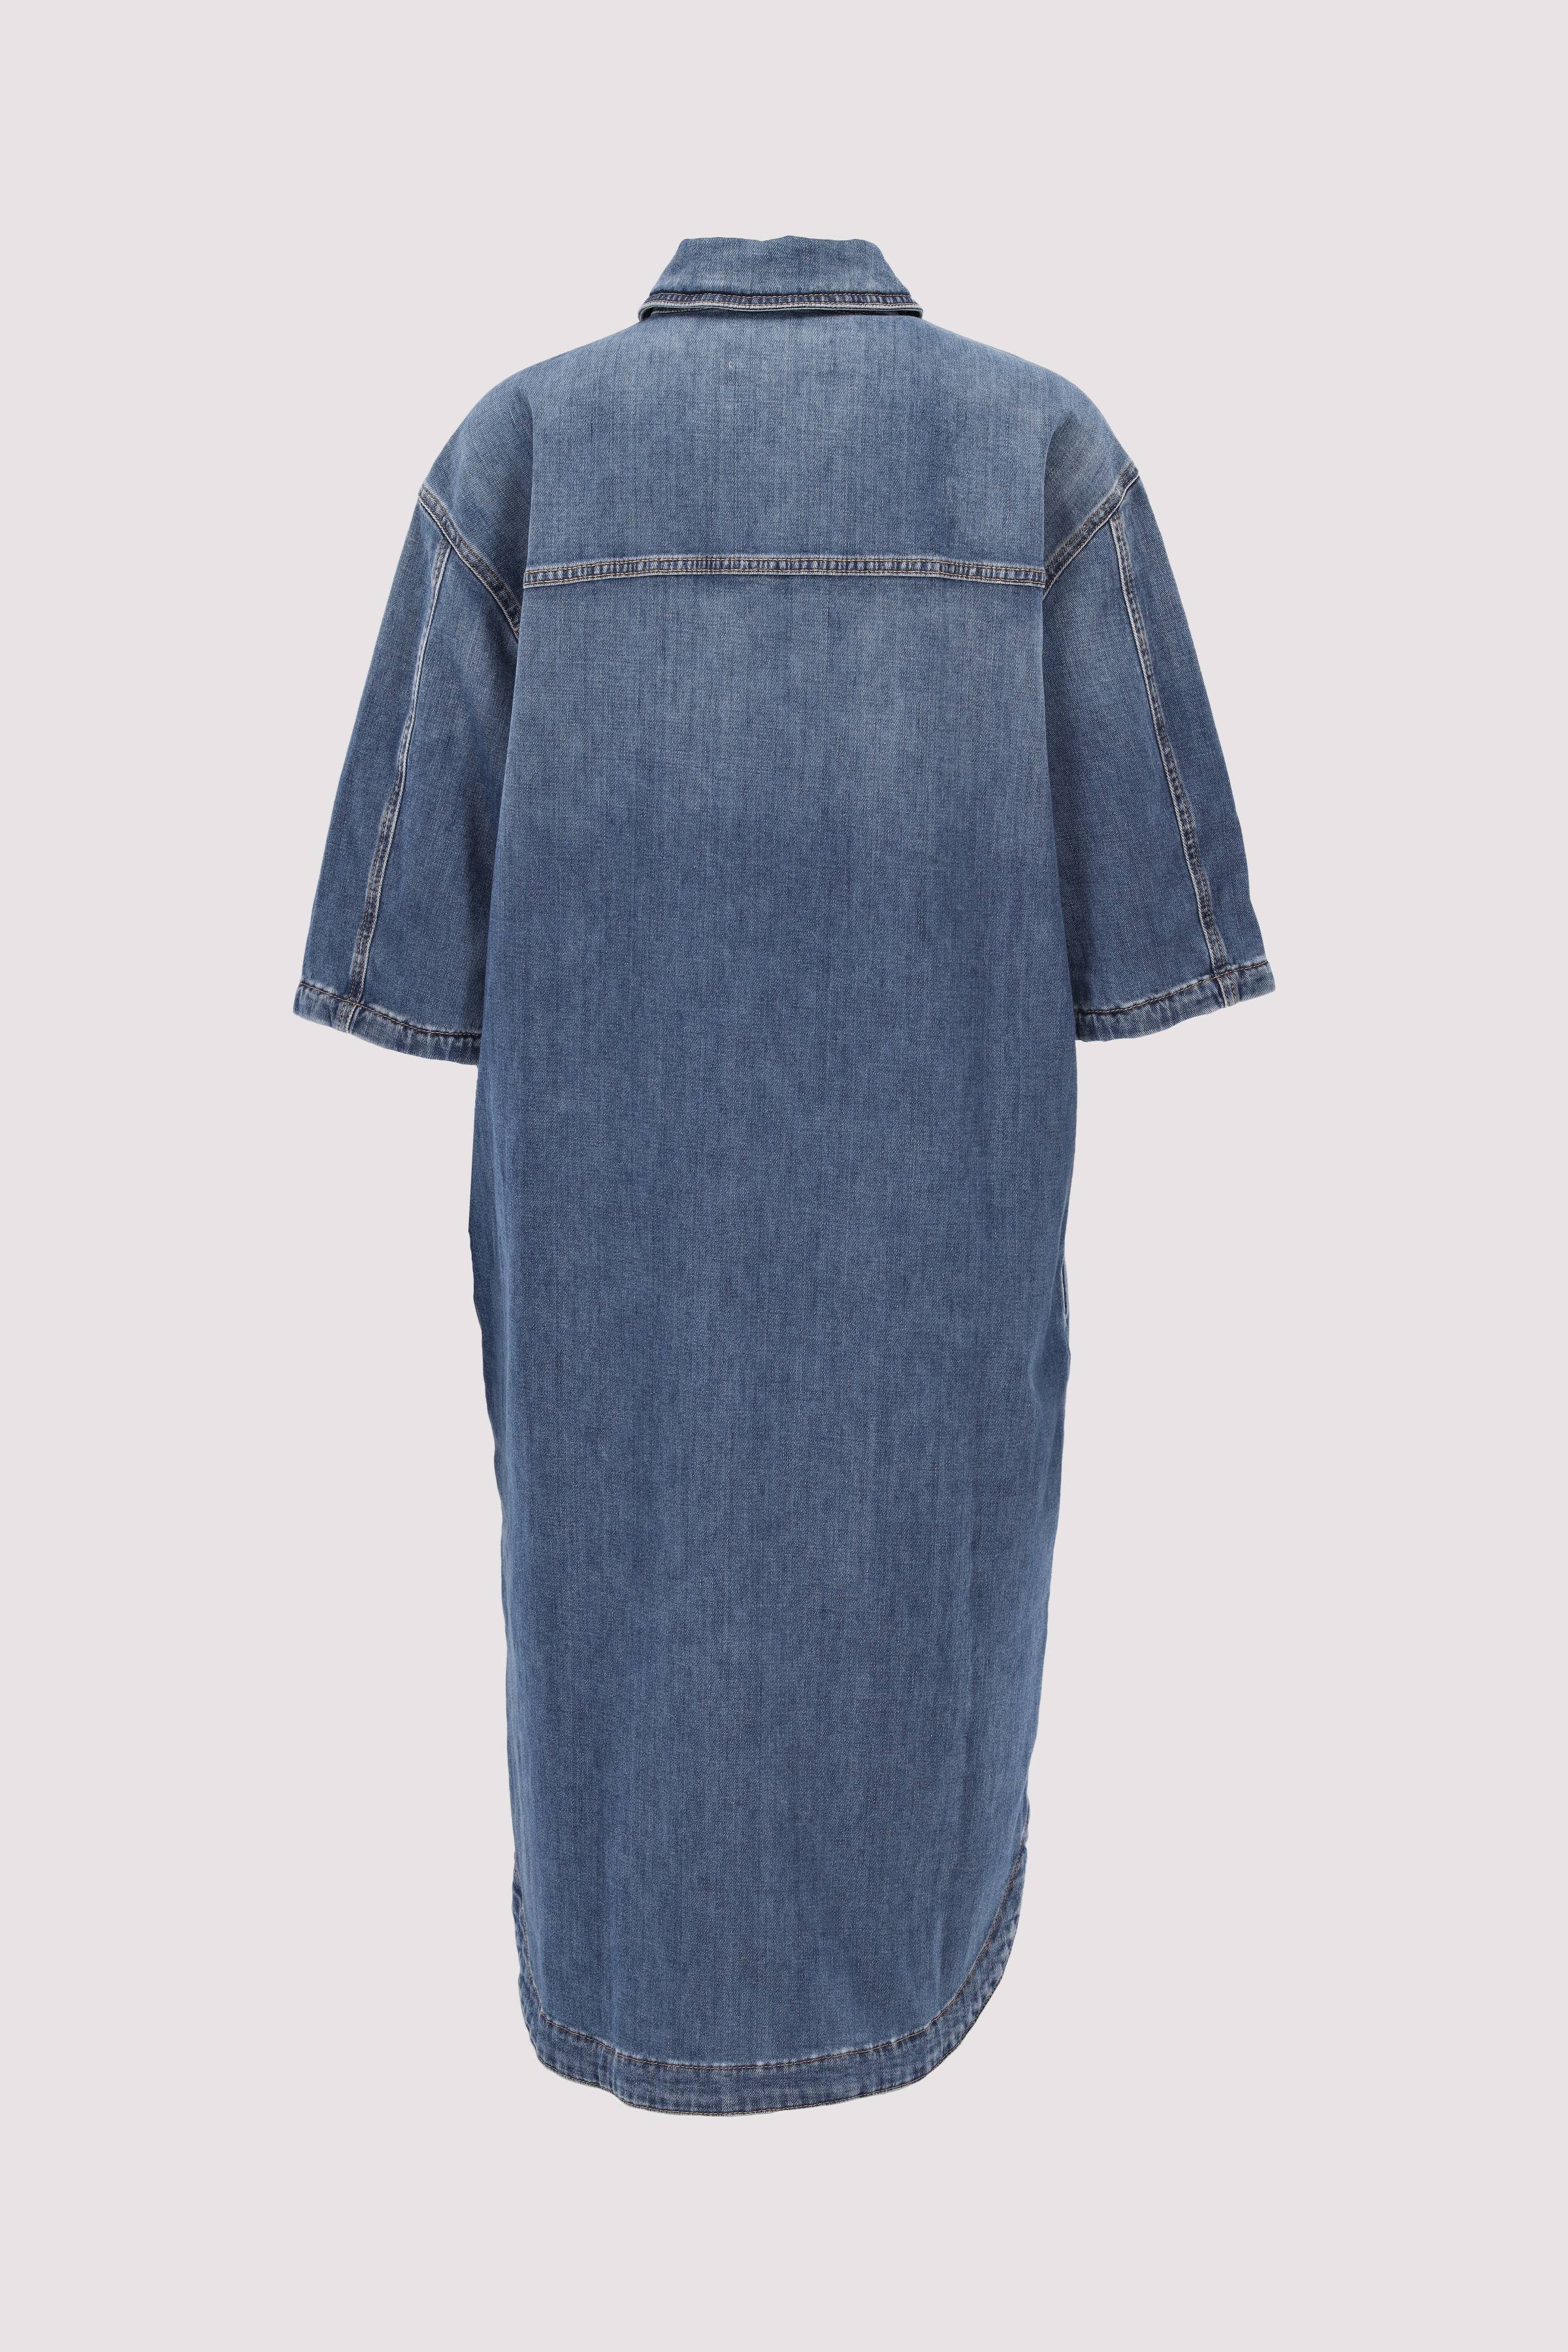 Denim dress, relaxed fit, ches